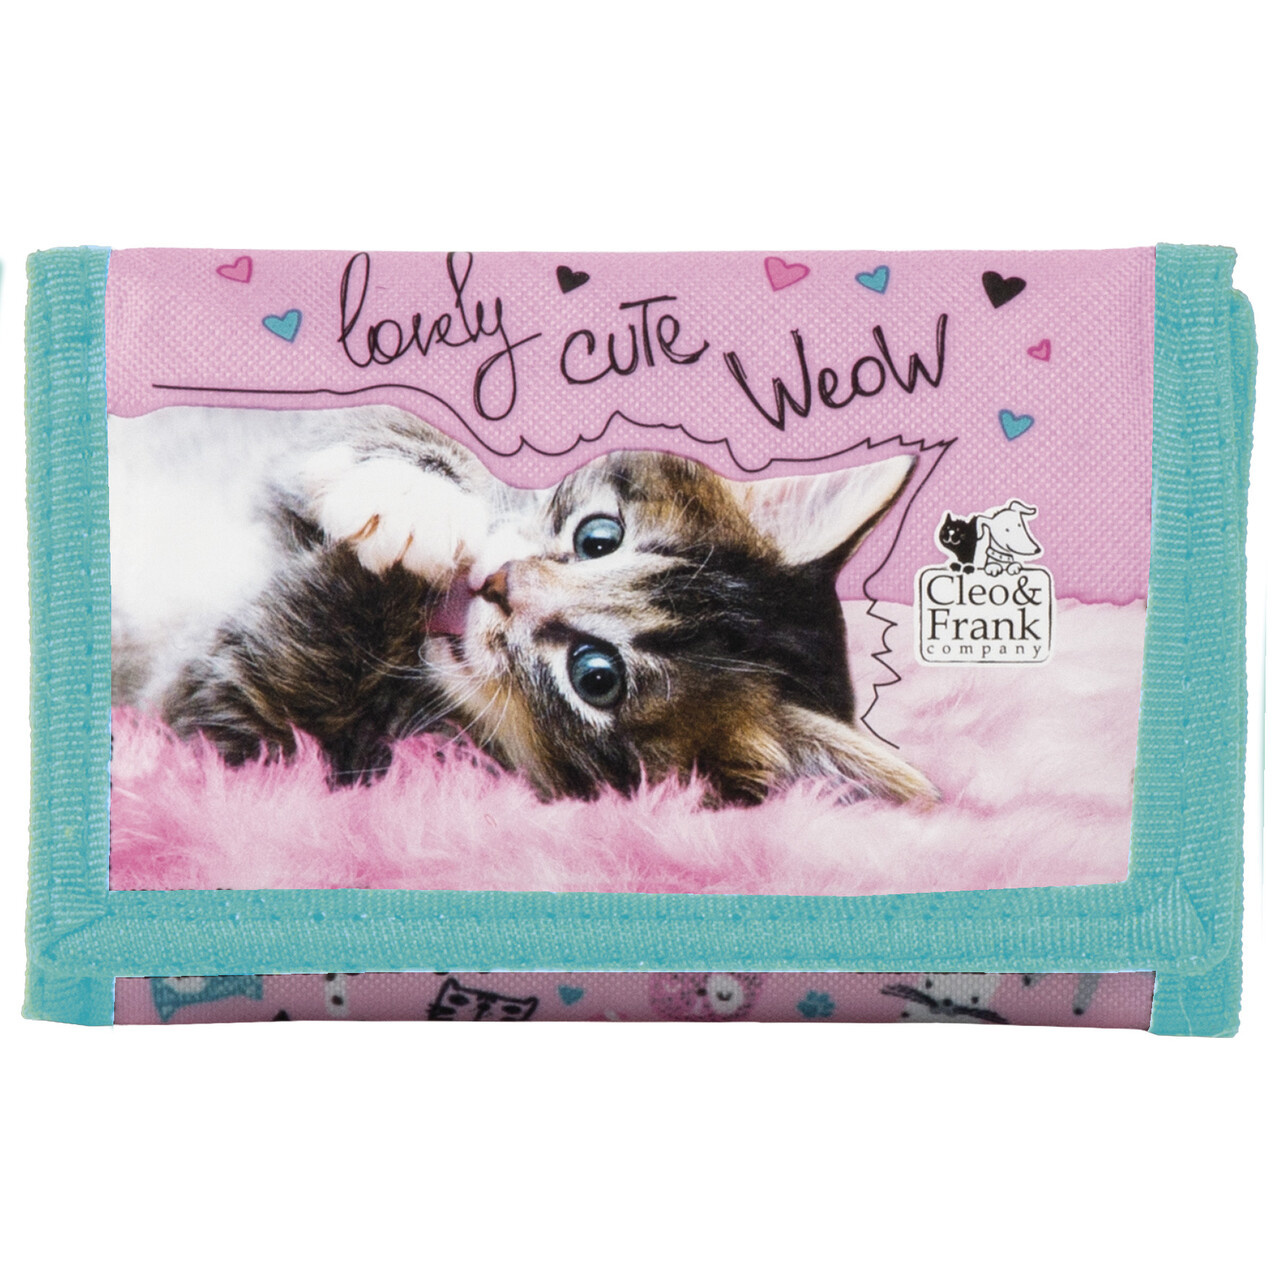 Cleo & Frank Wallet, Lovely - 13 x 8 x 1 cm - Polyester